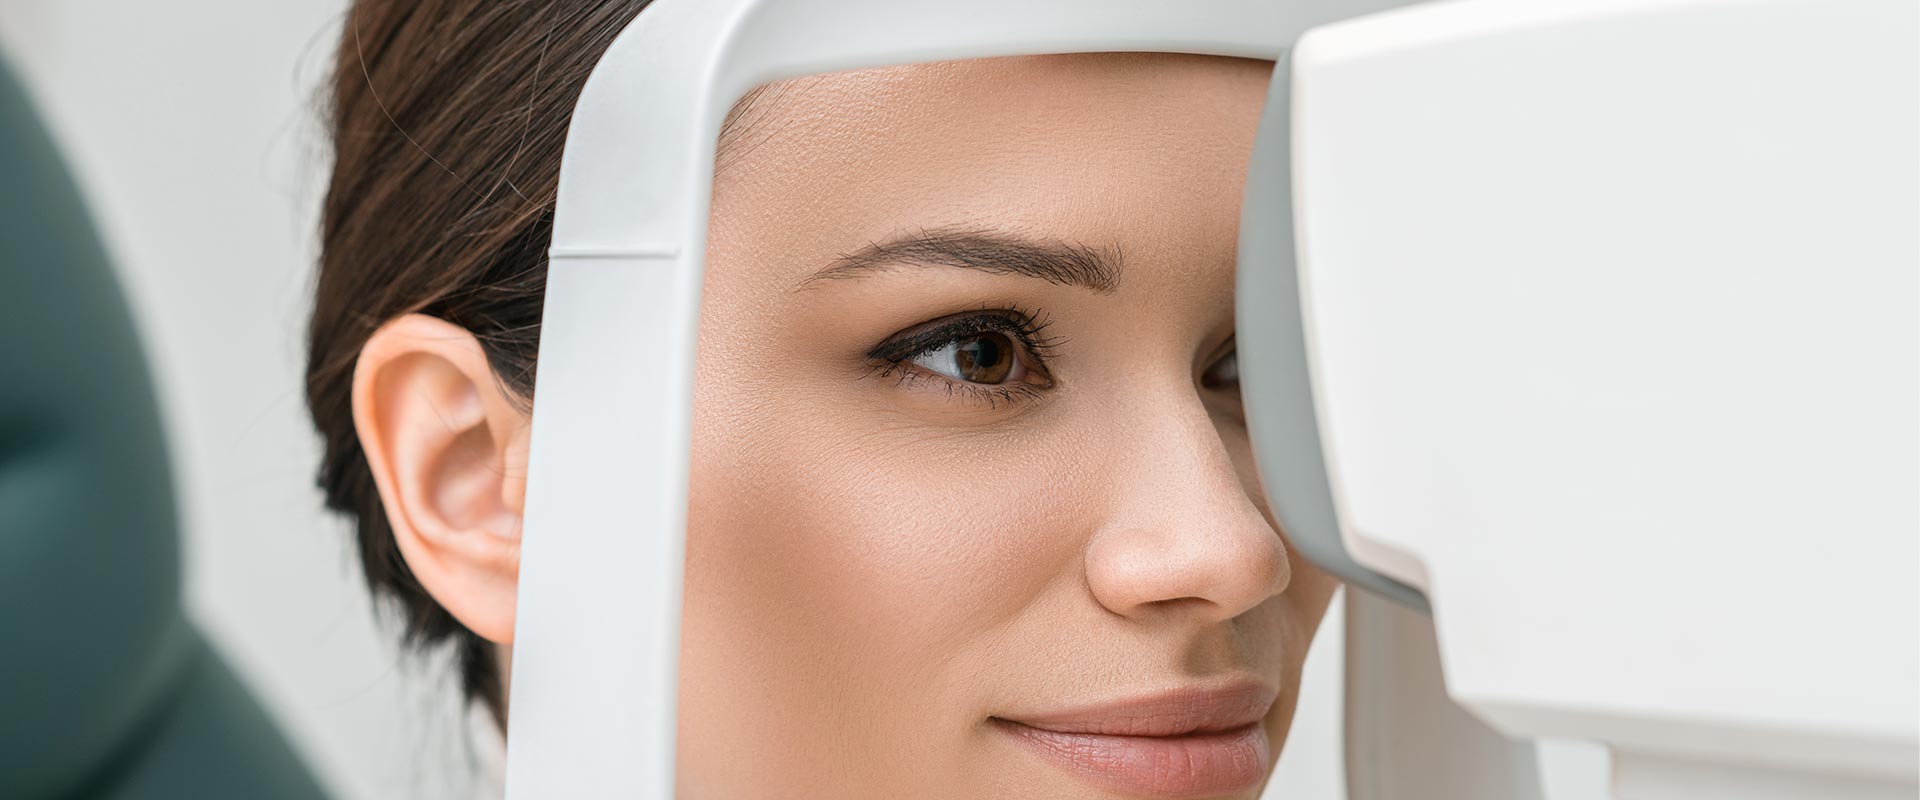 What is the most common slit lamp illumination?